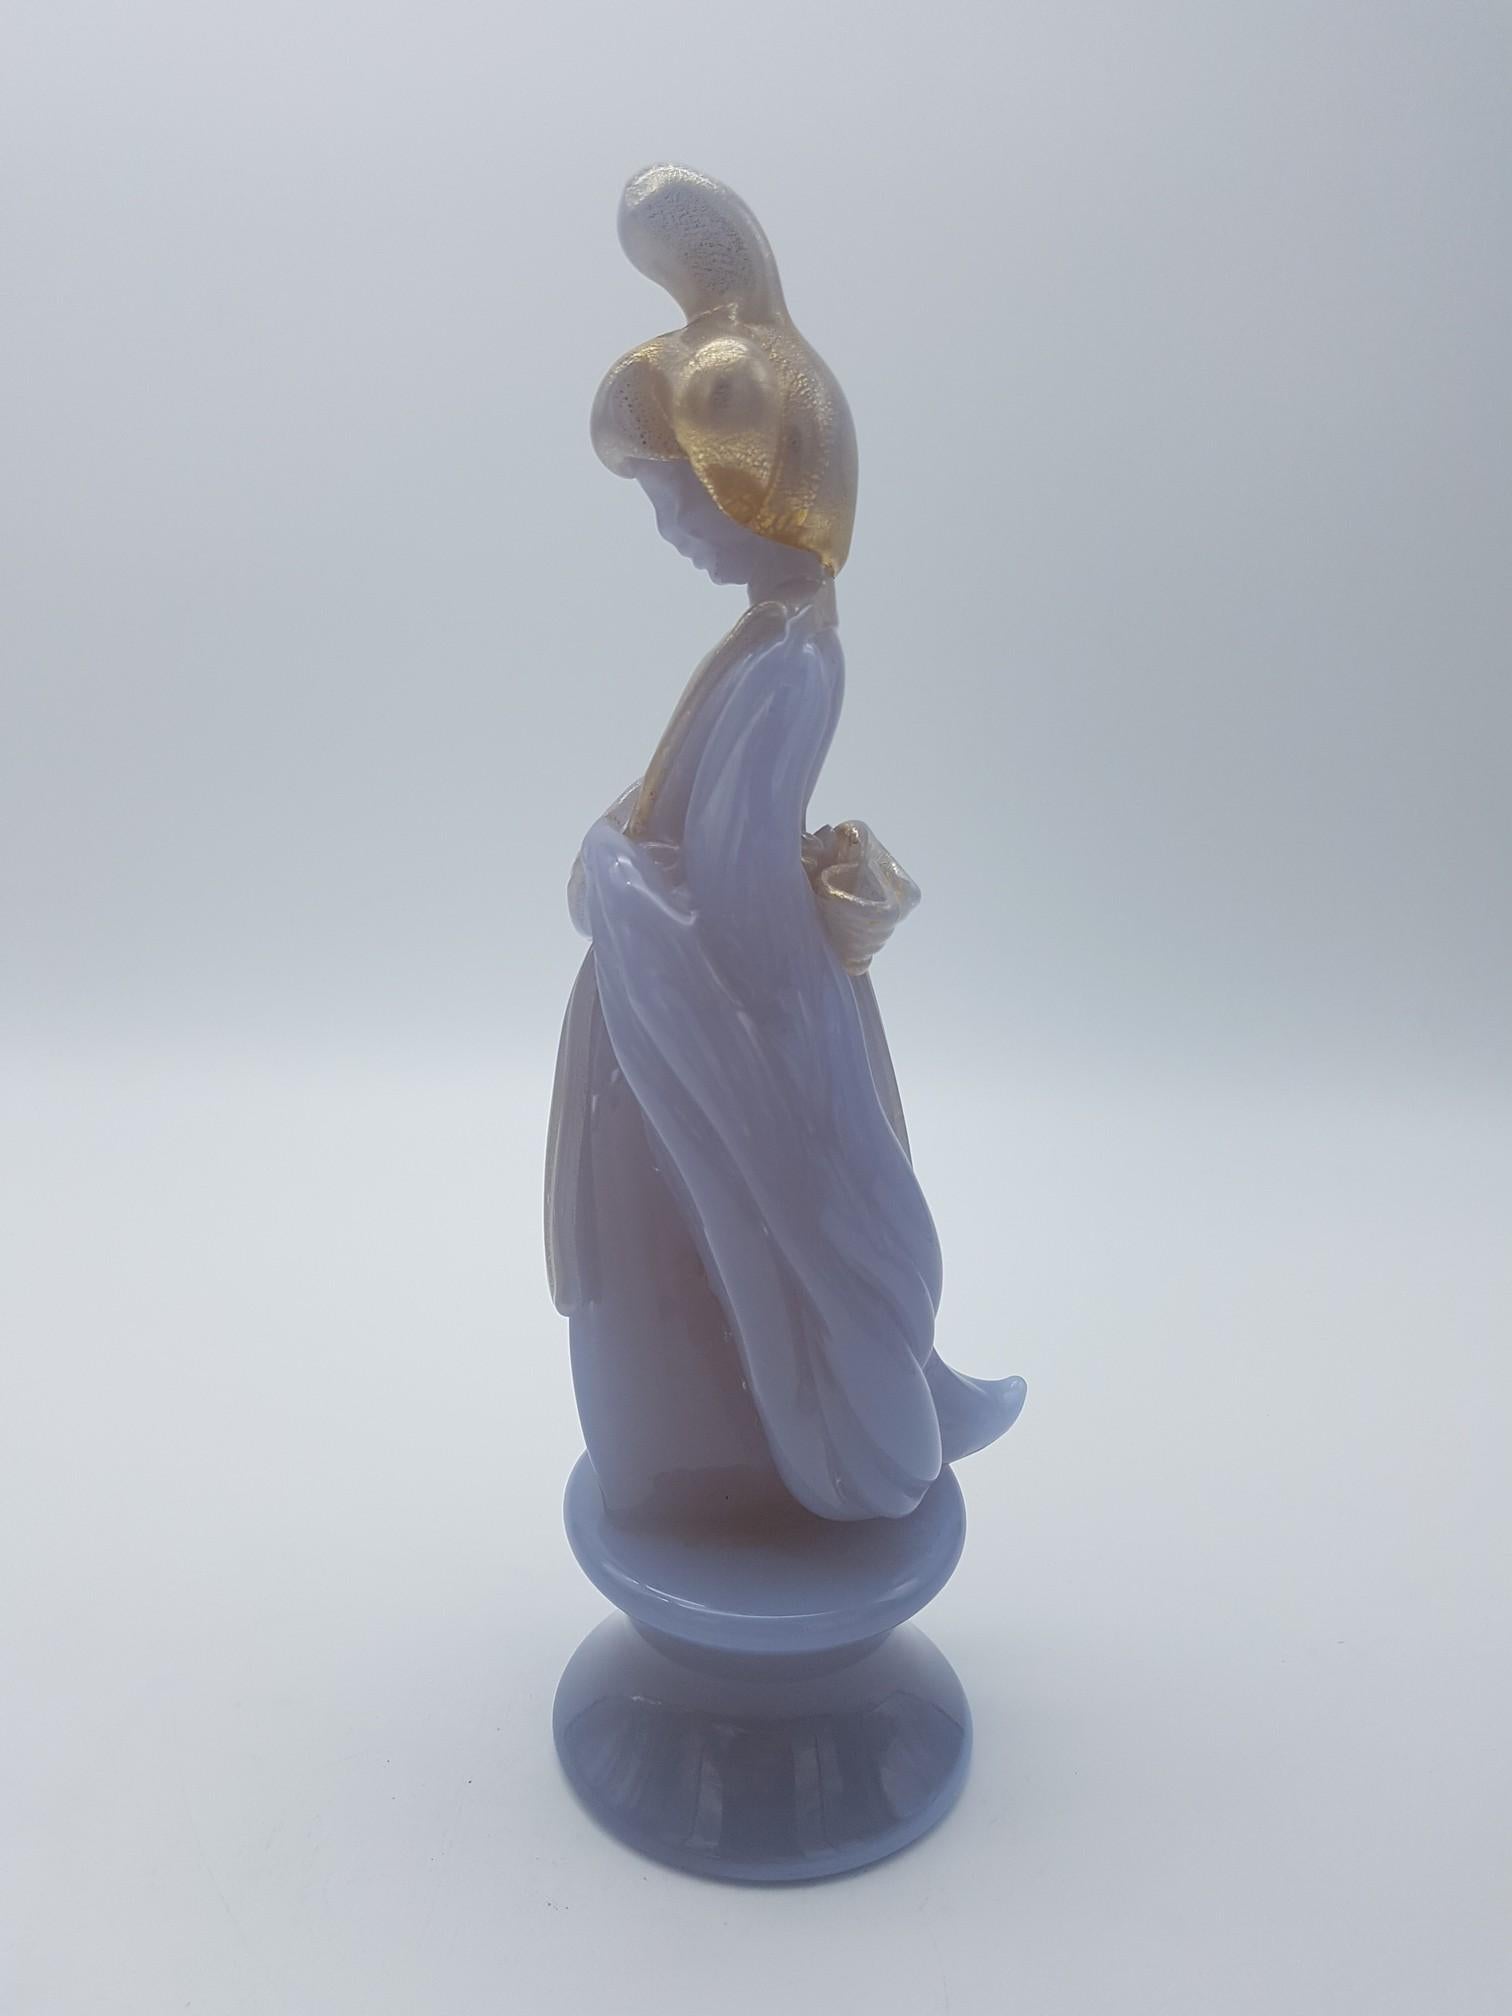 Hand-Crafted Vintage Murano Glass Geisha Figurine by Ermanno Nason at Cenedese, Late 1960s For Sale